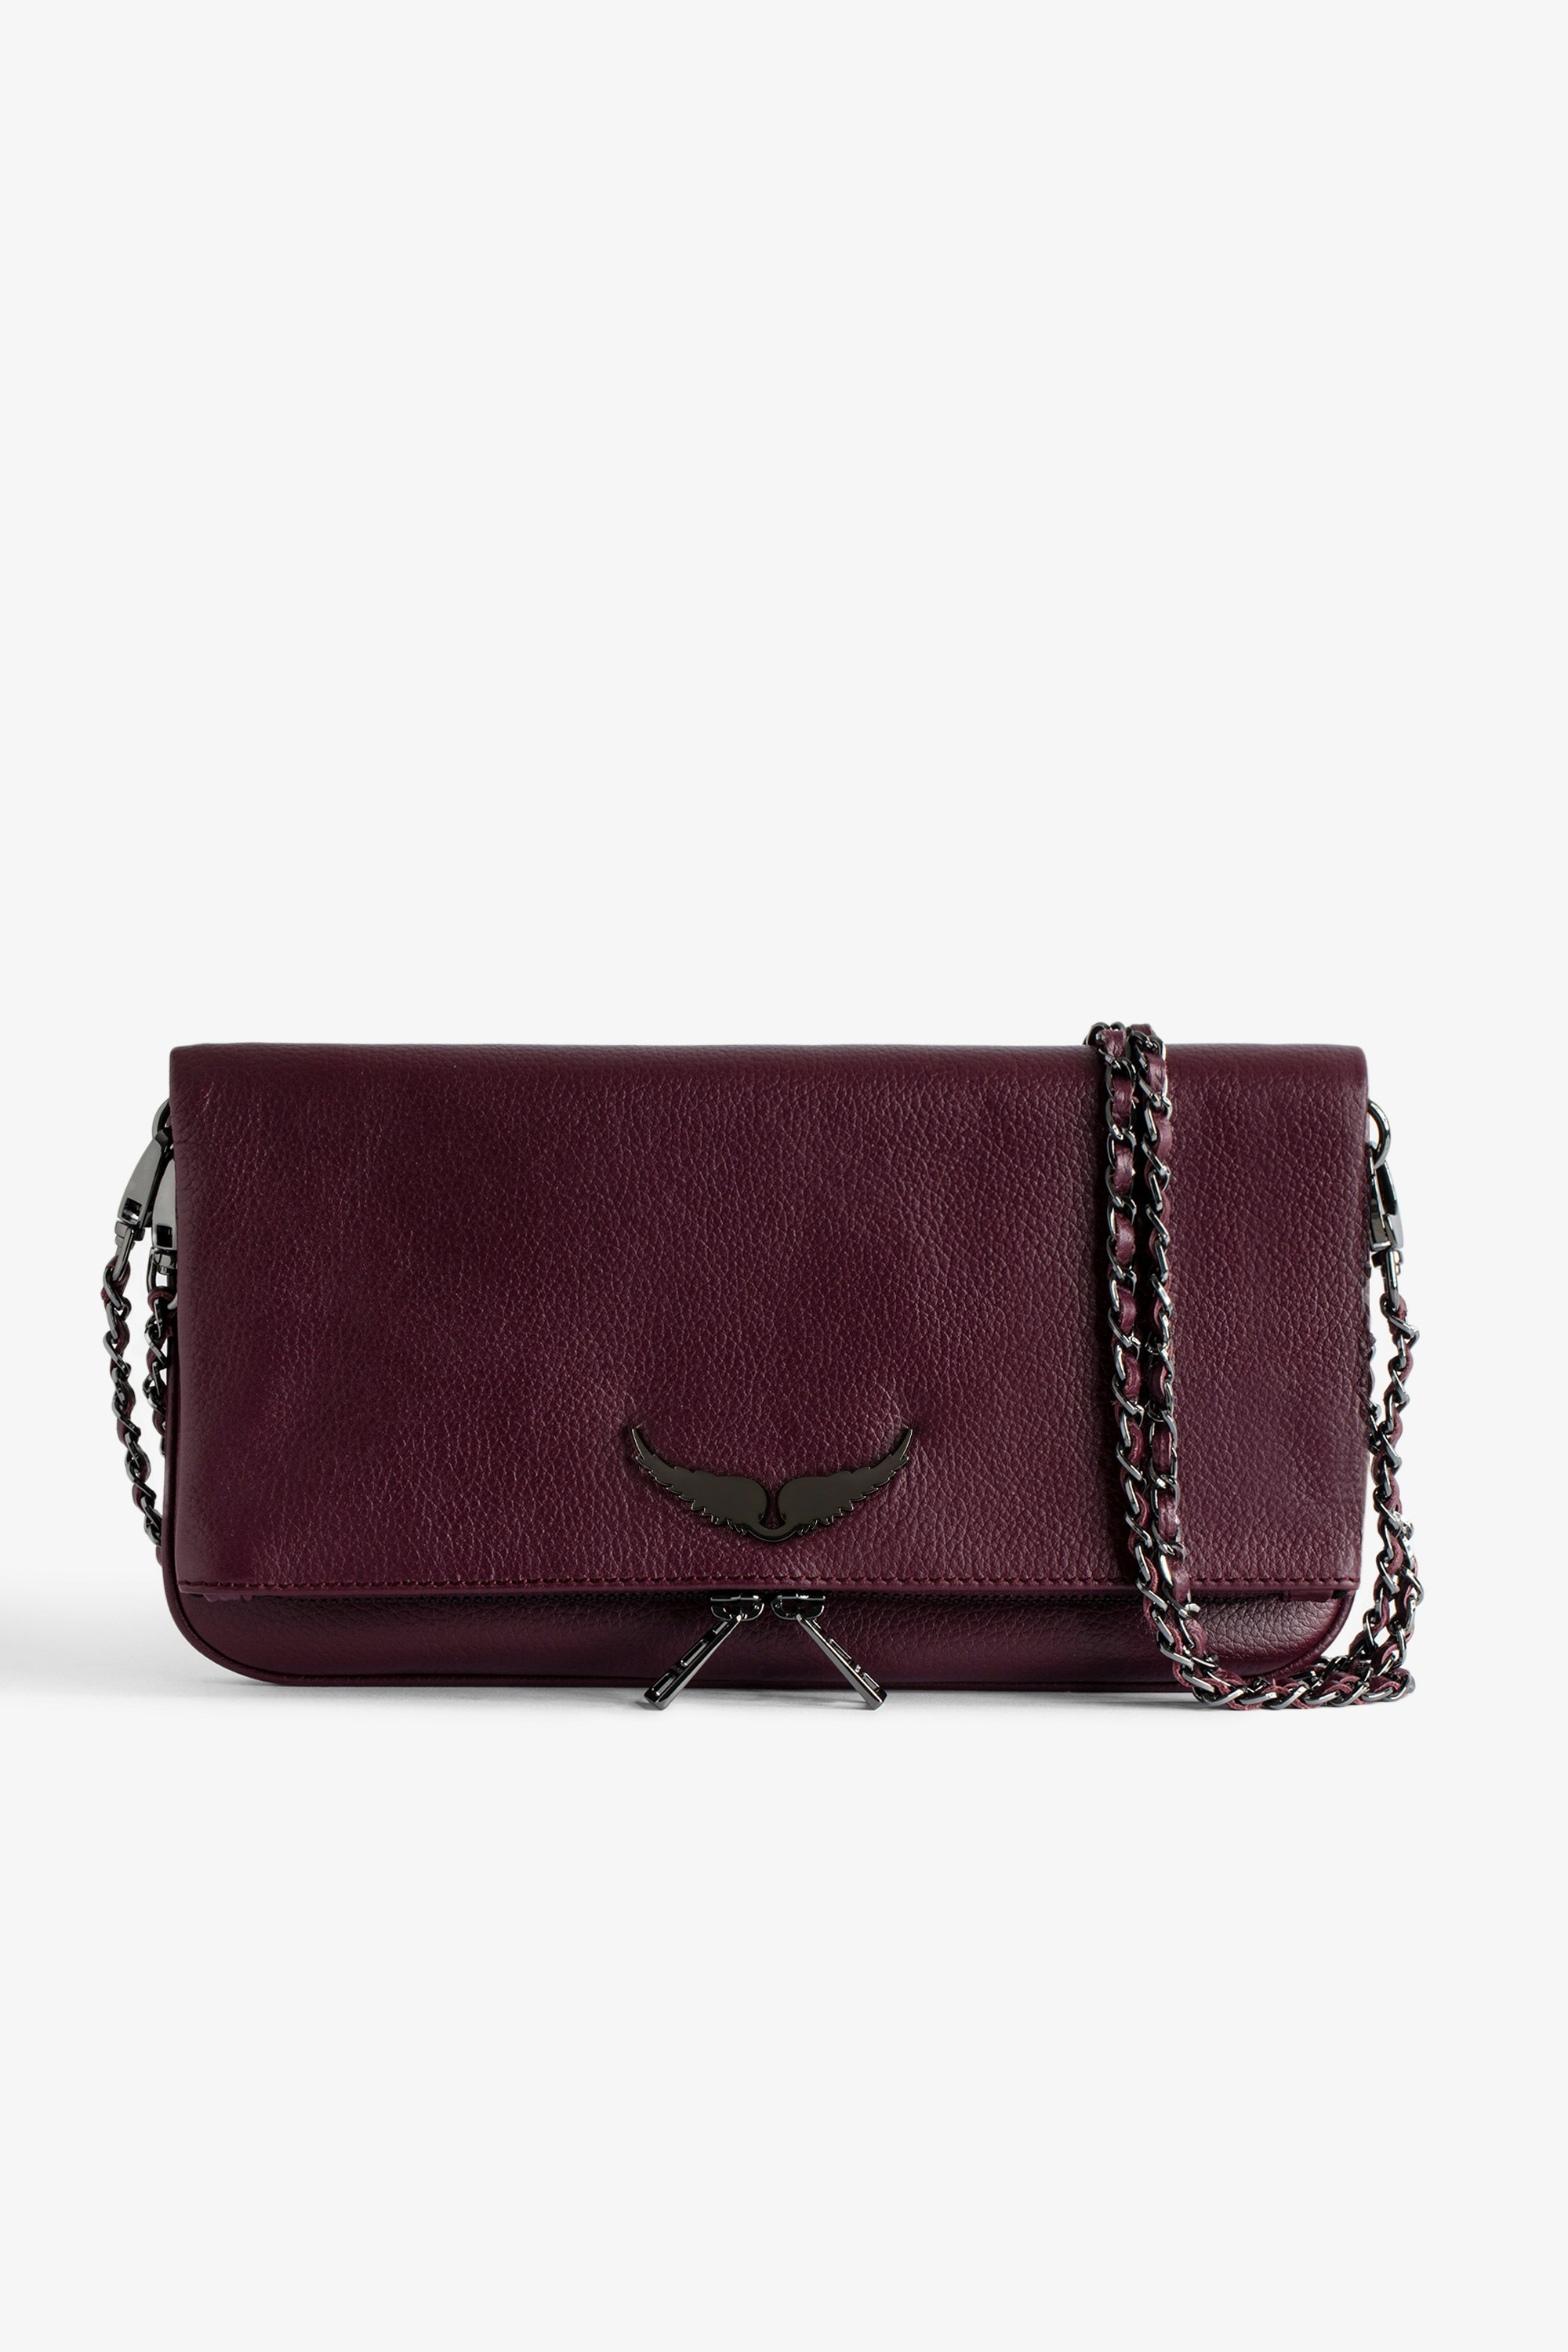 Rock Clutch - Women’s burgundy grained leather clutch with double leather and metal chain strap.